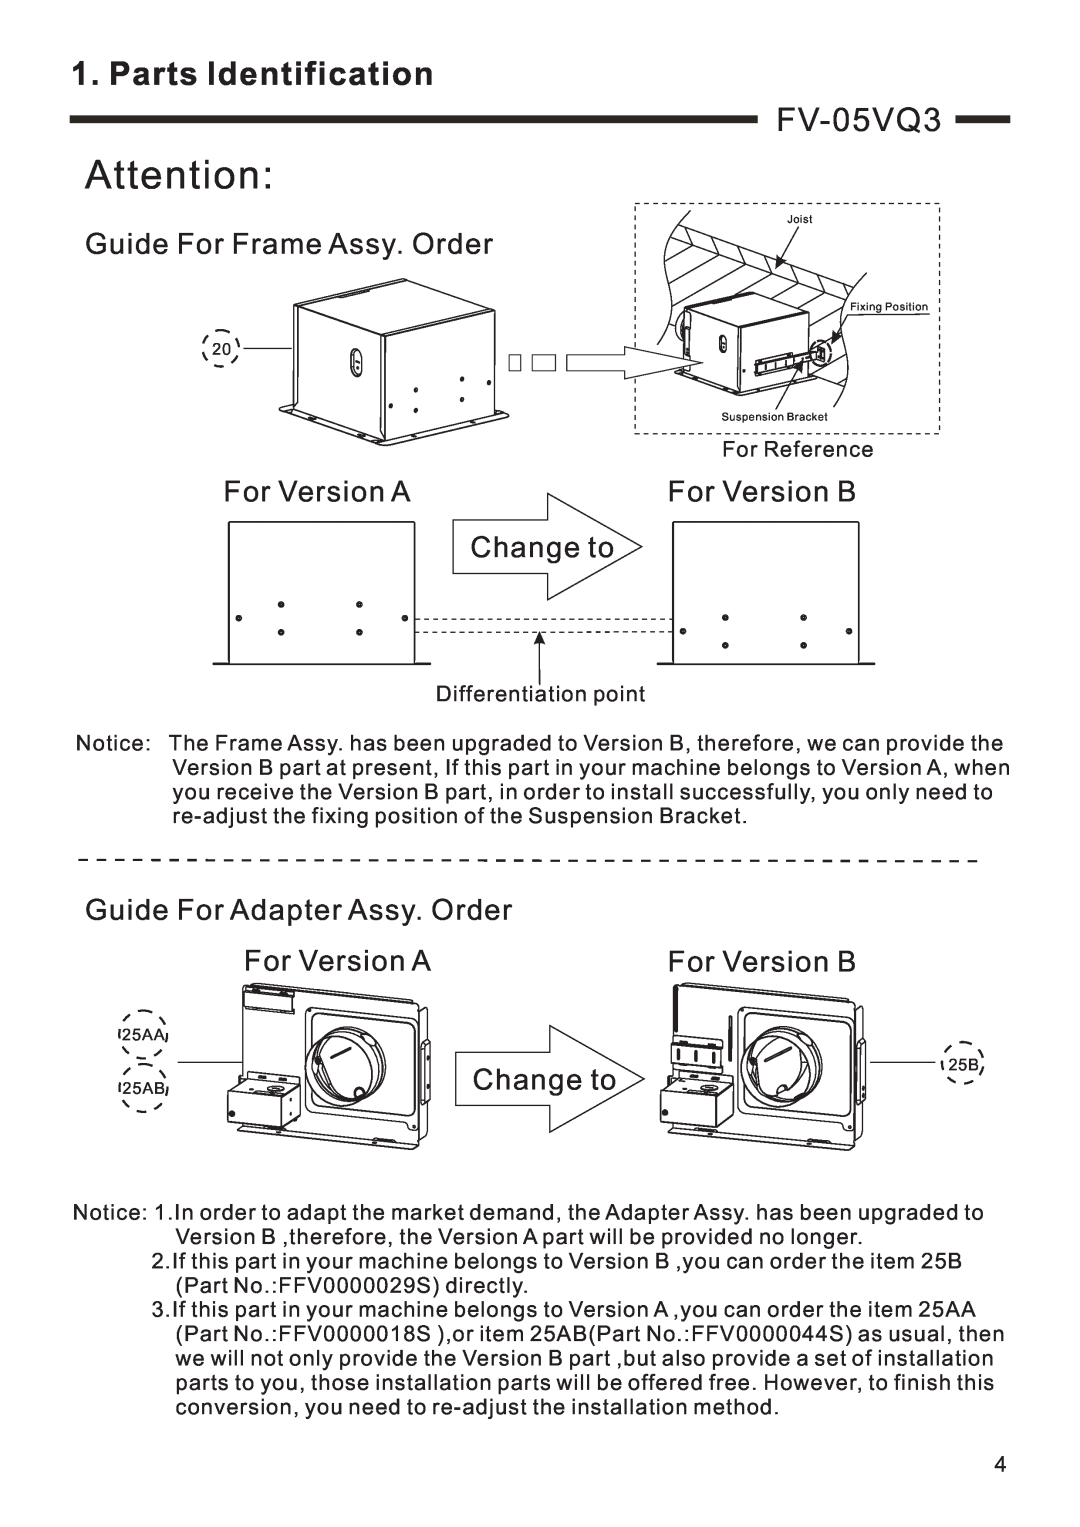 Panasonic FV-11VQ3 Guide For Frame Assy. Order, For Version A, For Version B, Change to, Guide For Adapter Assy. Order 